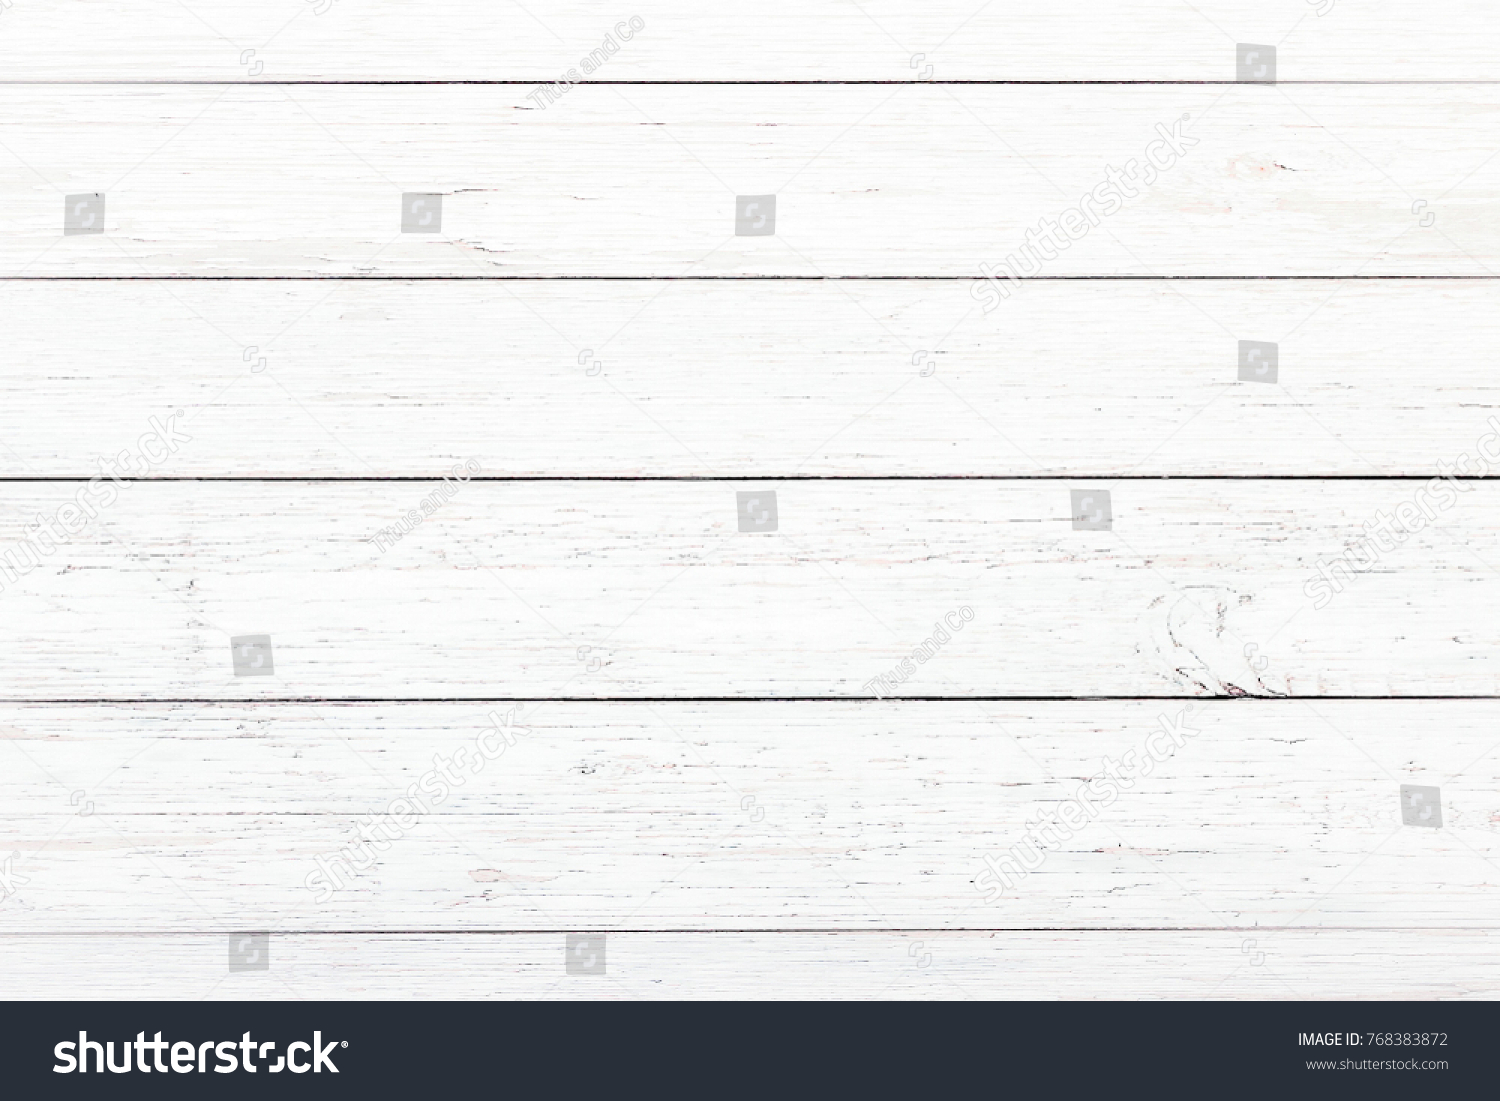 Wood texture background, wood planks. Grunge wood wall pattern #768383872